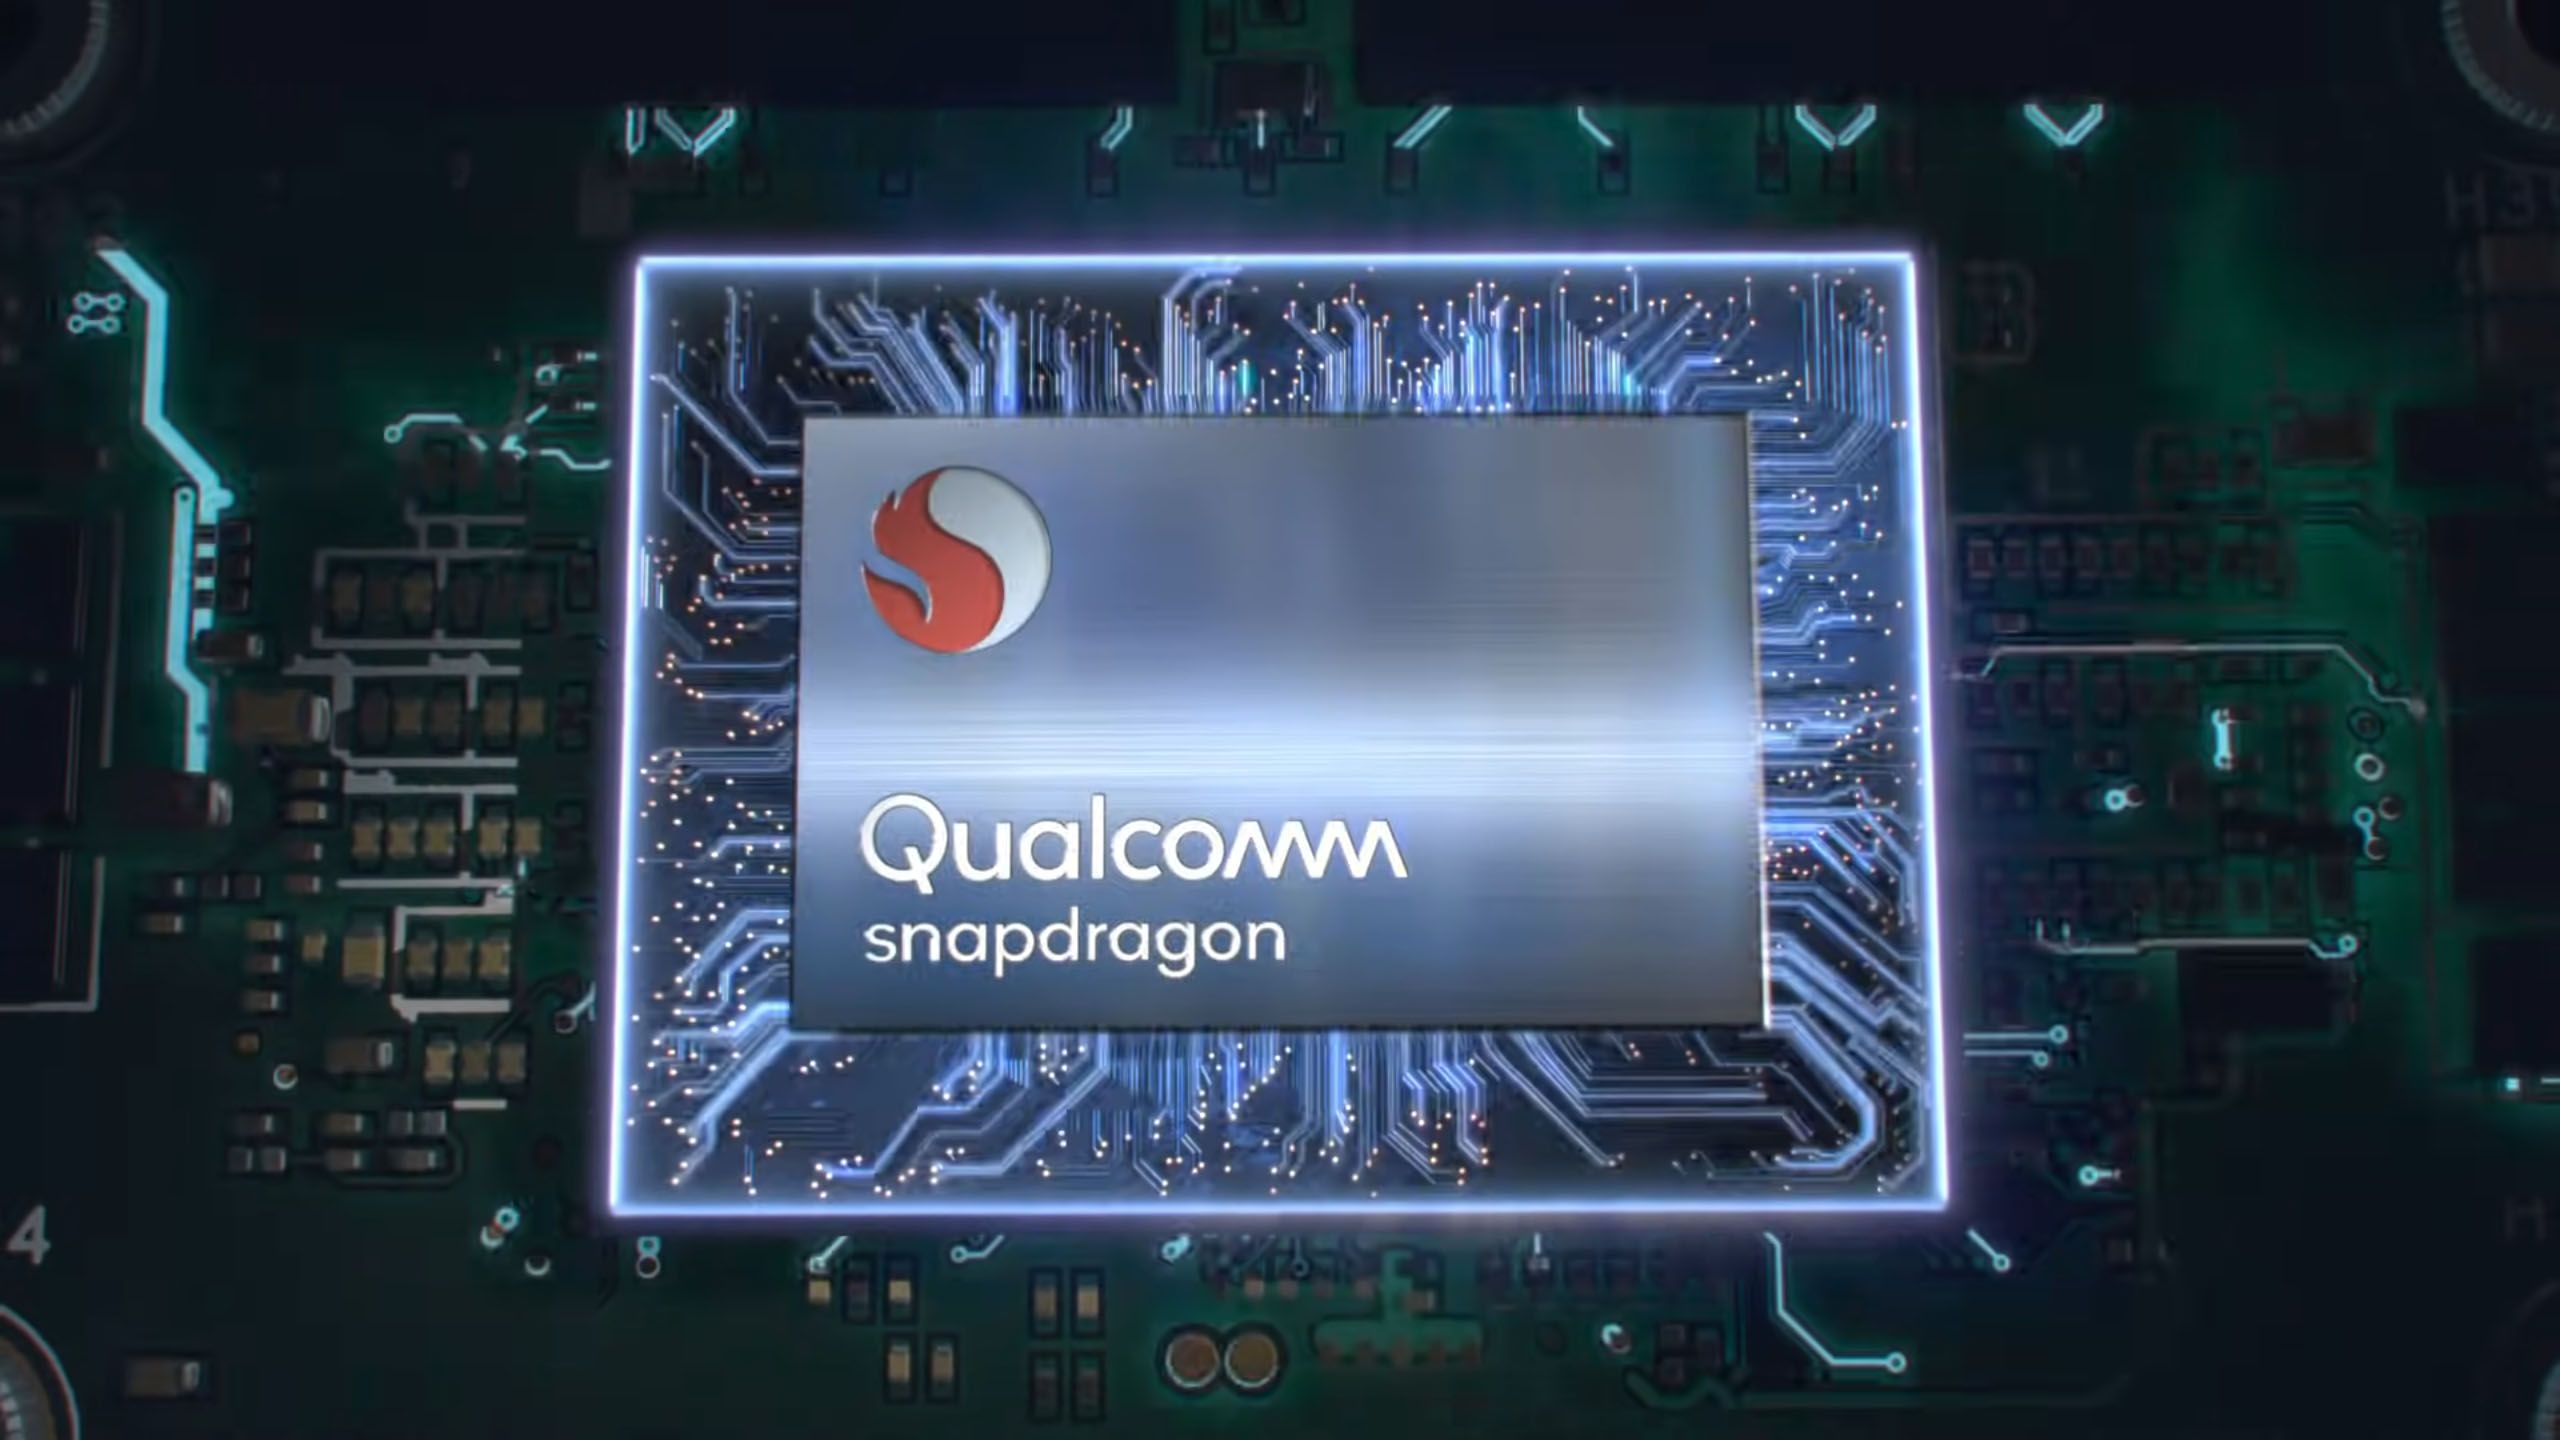 Qualcomm may launch the Snapdragon 8 Gen 2 slightly earlier than usual